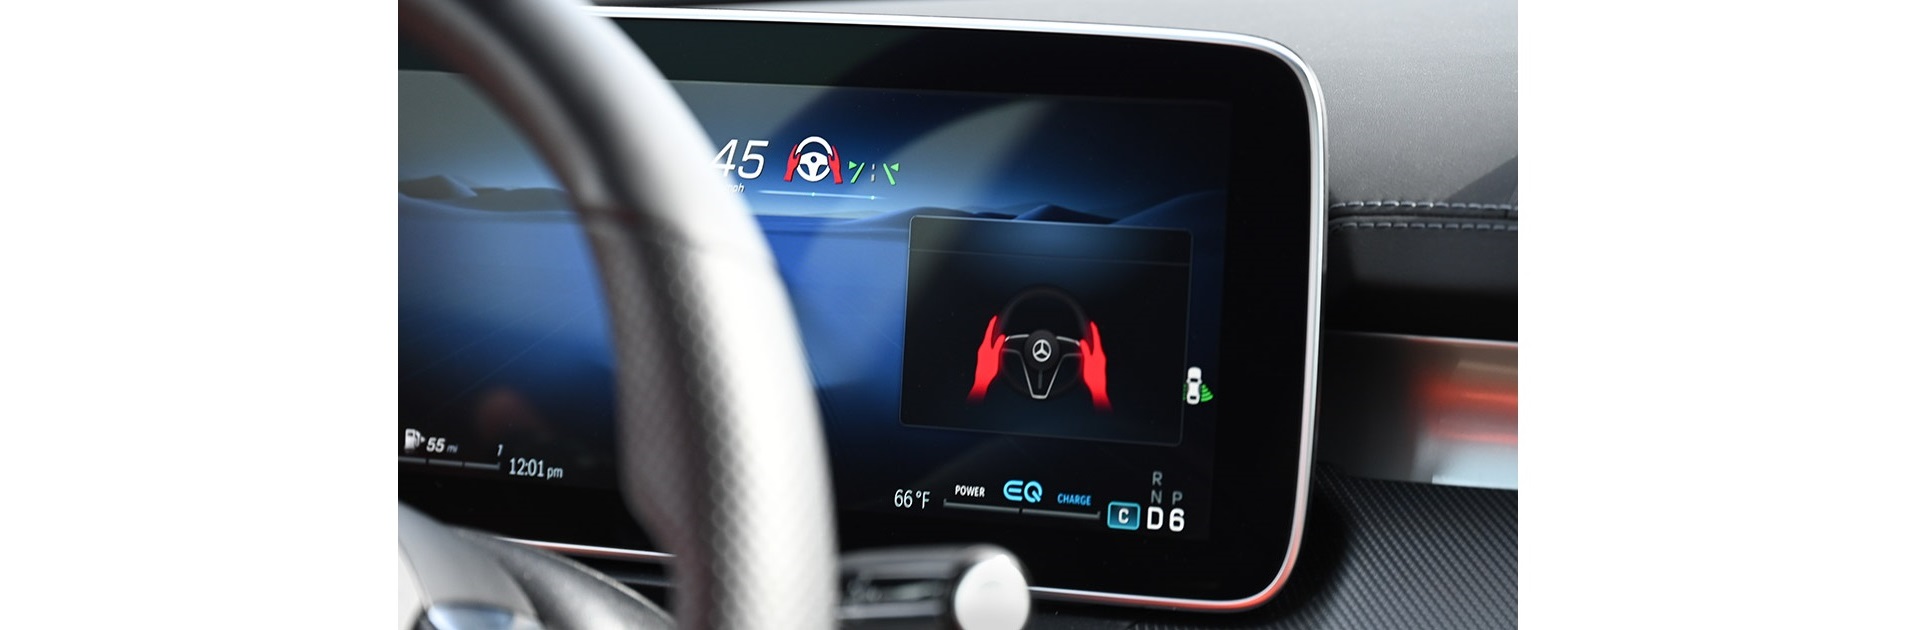 IIHS introduces new ratings for partial driving automation systems